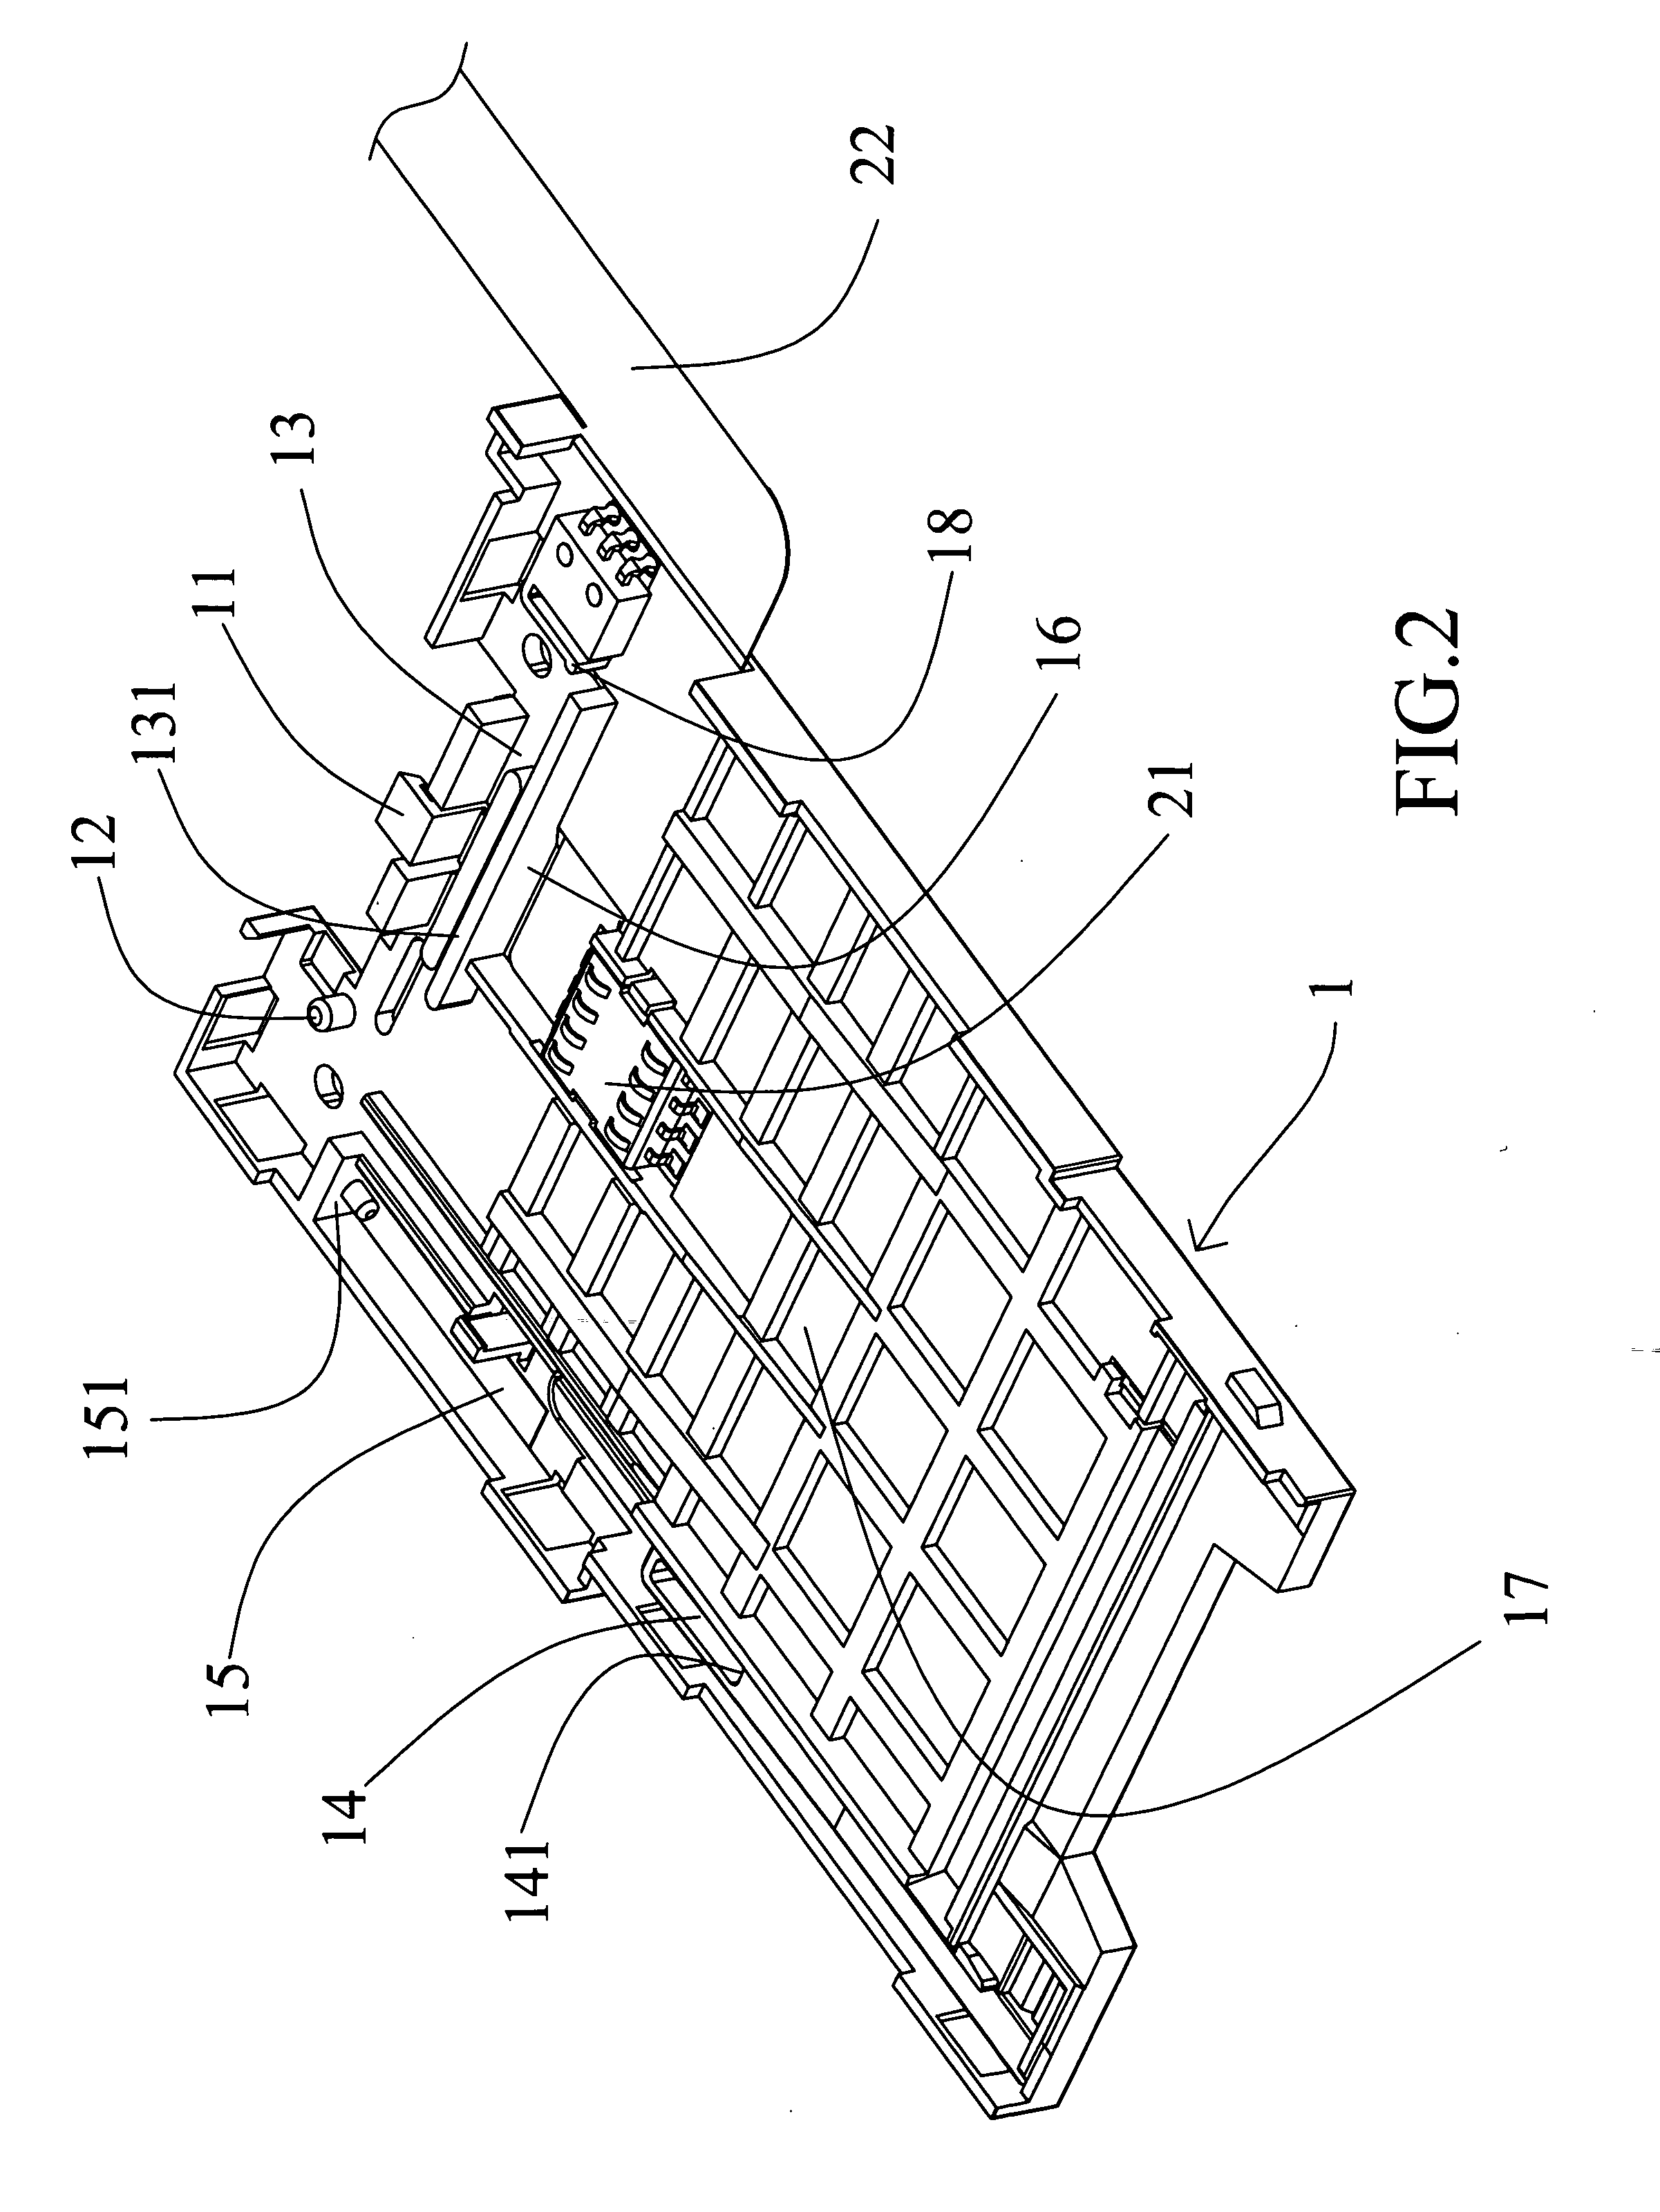 Card ejection unit of an improved IC card device